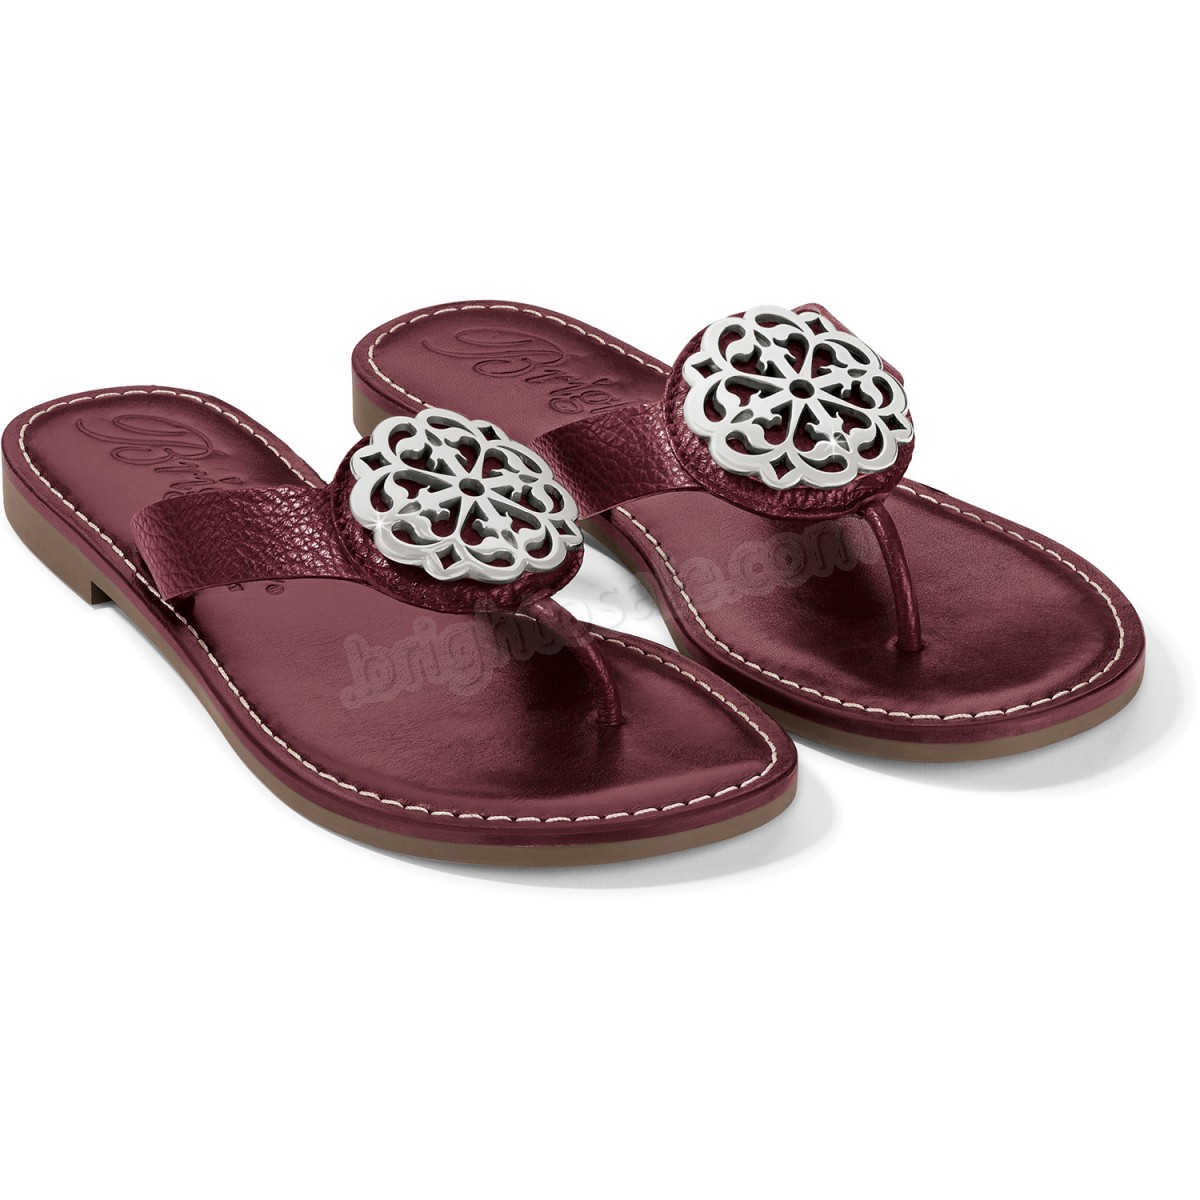 Brighton Collectibles & Online Discount Twine Woven Sandals - -15